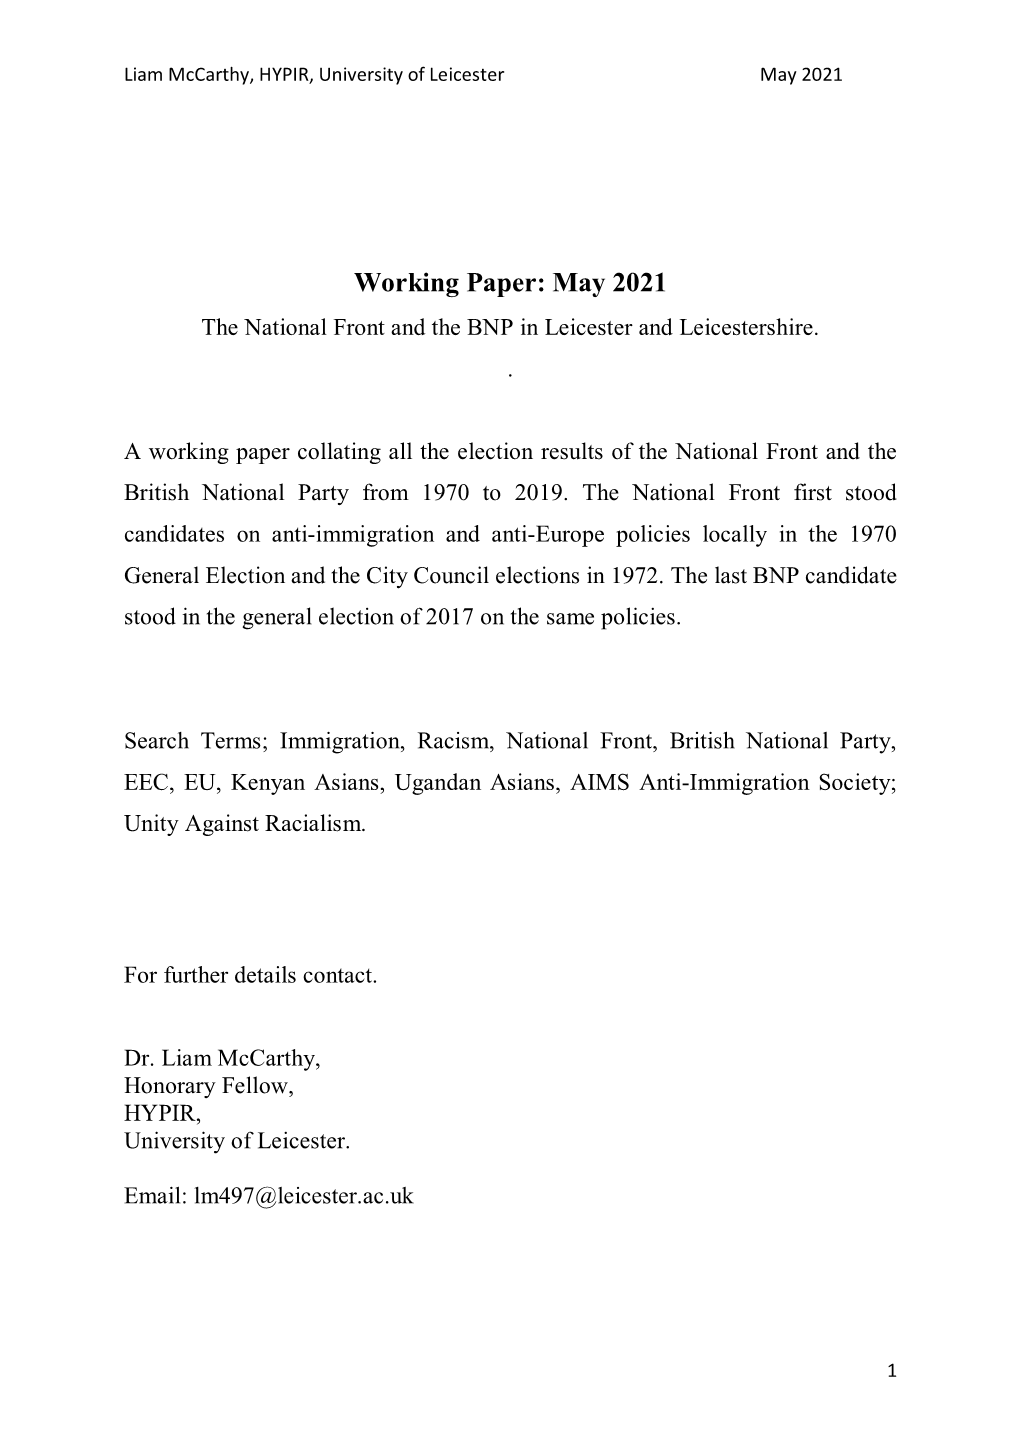 Working Paper: May 2021 the National Front and the BNP in Leicester and Leicestershire